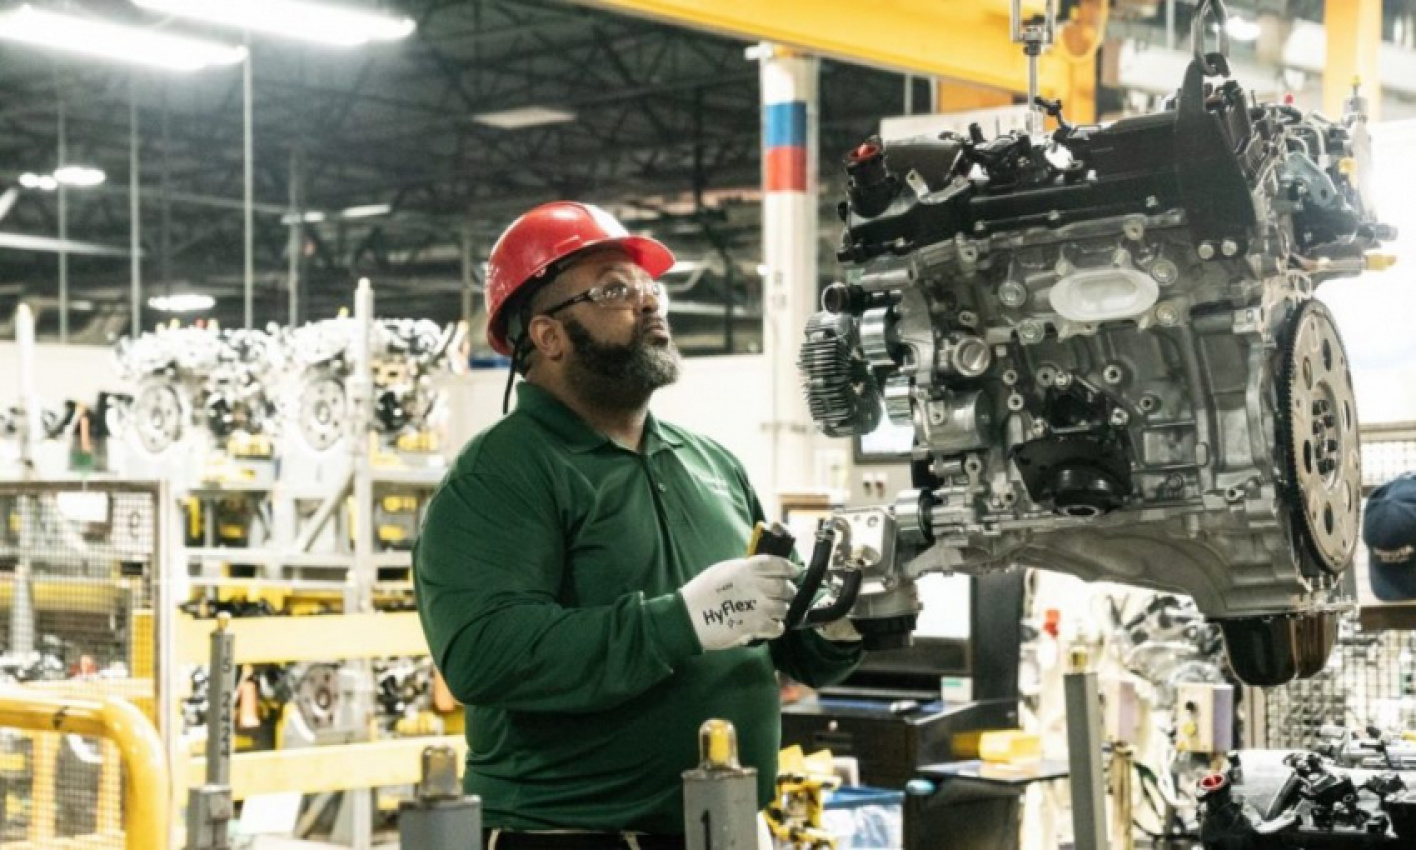 autos, cars, industry news, toyota, combustion engine, four-cylinder, ice, industry news, investment, us, v6, v8, toyota announces r5.8 billion investment in production of four-cylinder engines.